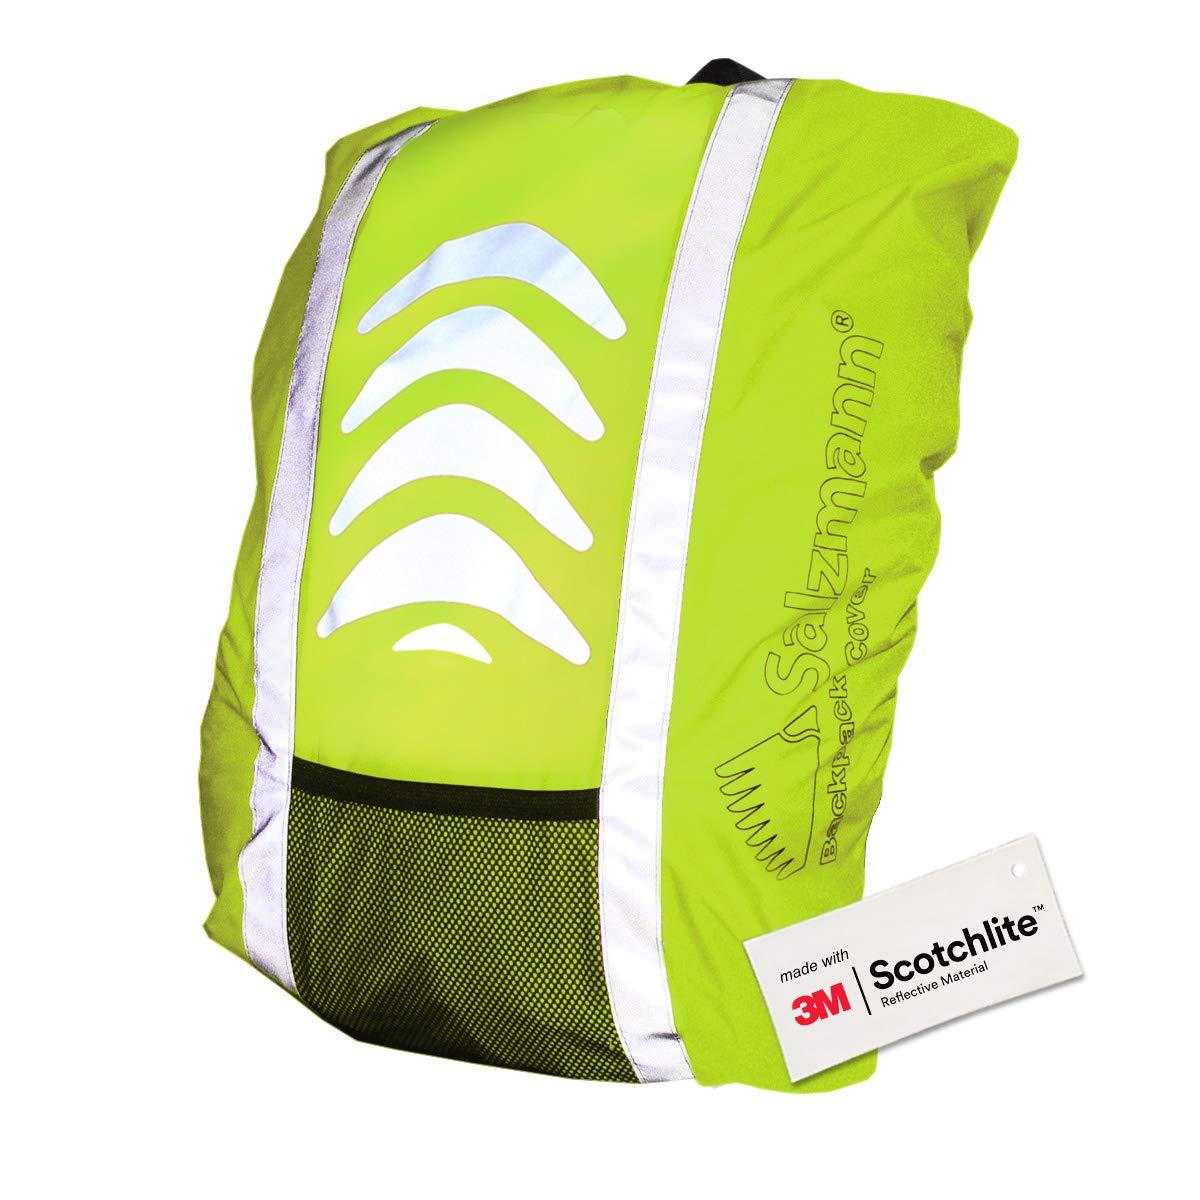 Salzmann 3M Reflective Backpack Cover | High Visibility, Waterproof ...